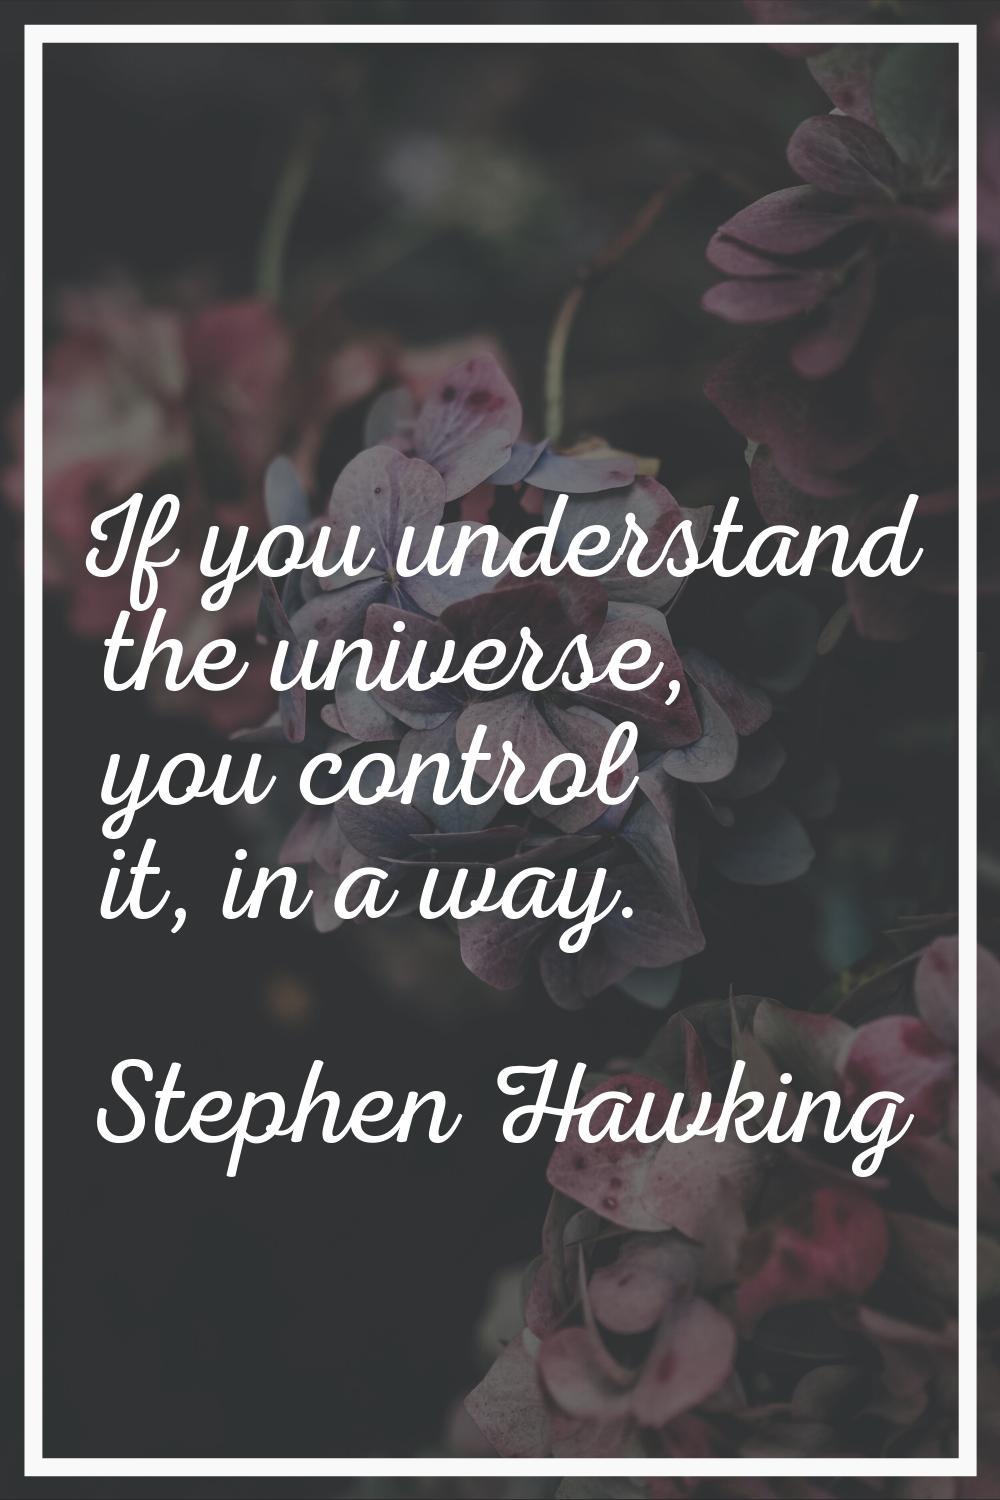 If you understand the universe, you control it, in a way.